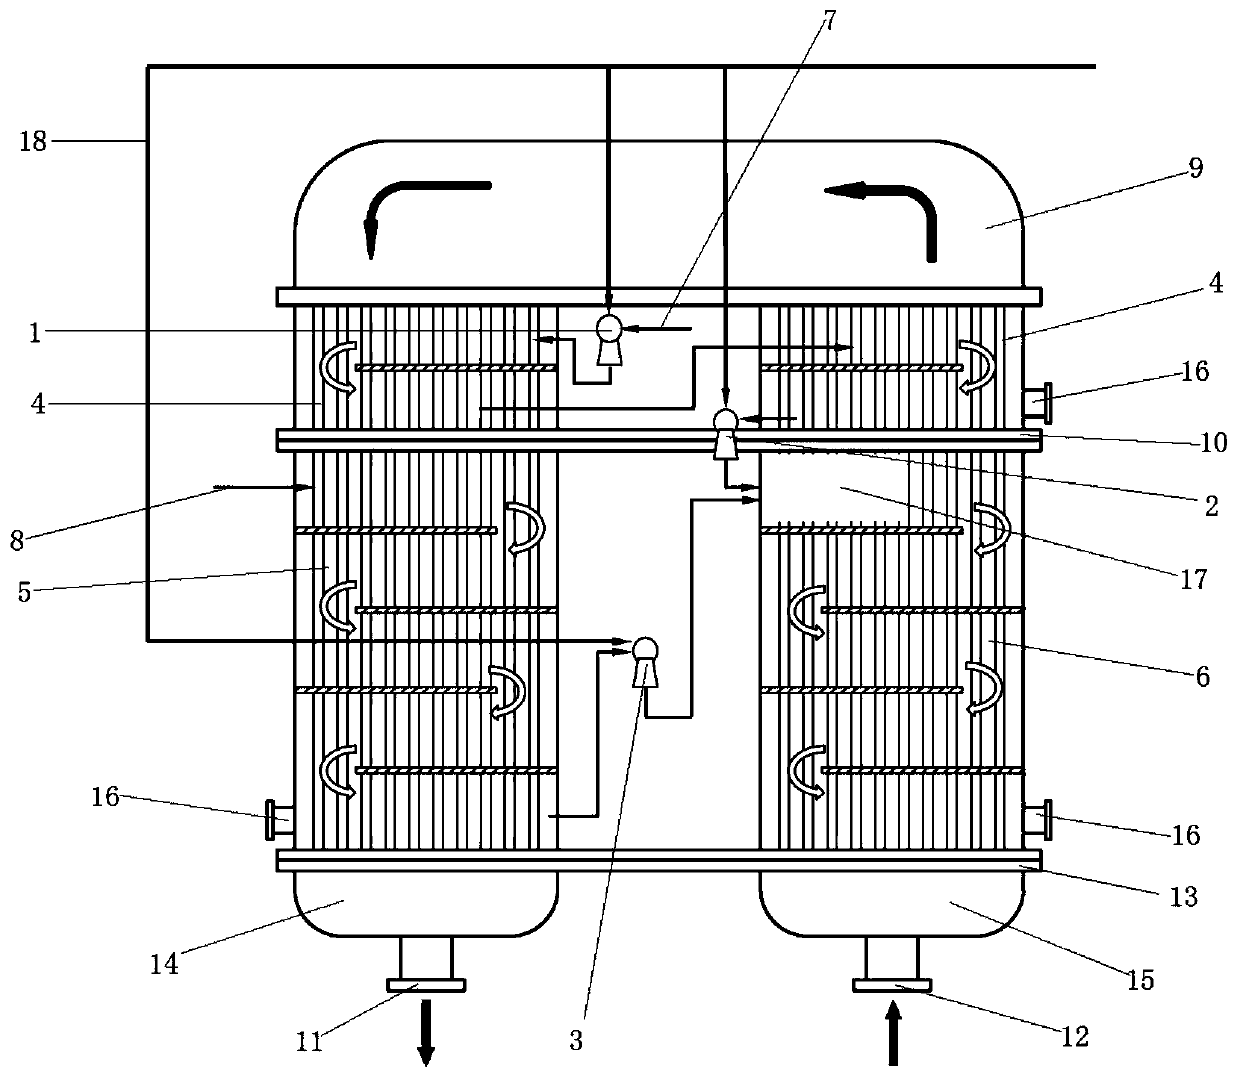 An air extraction system for a steam power plant